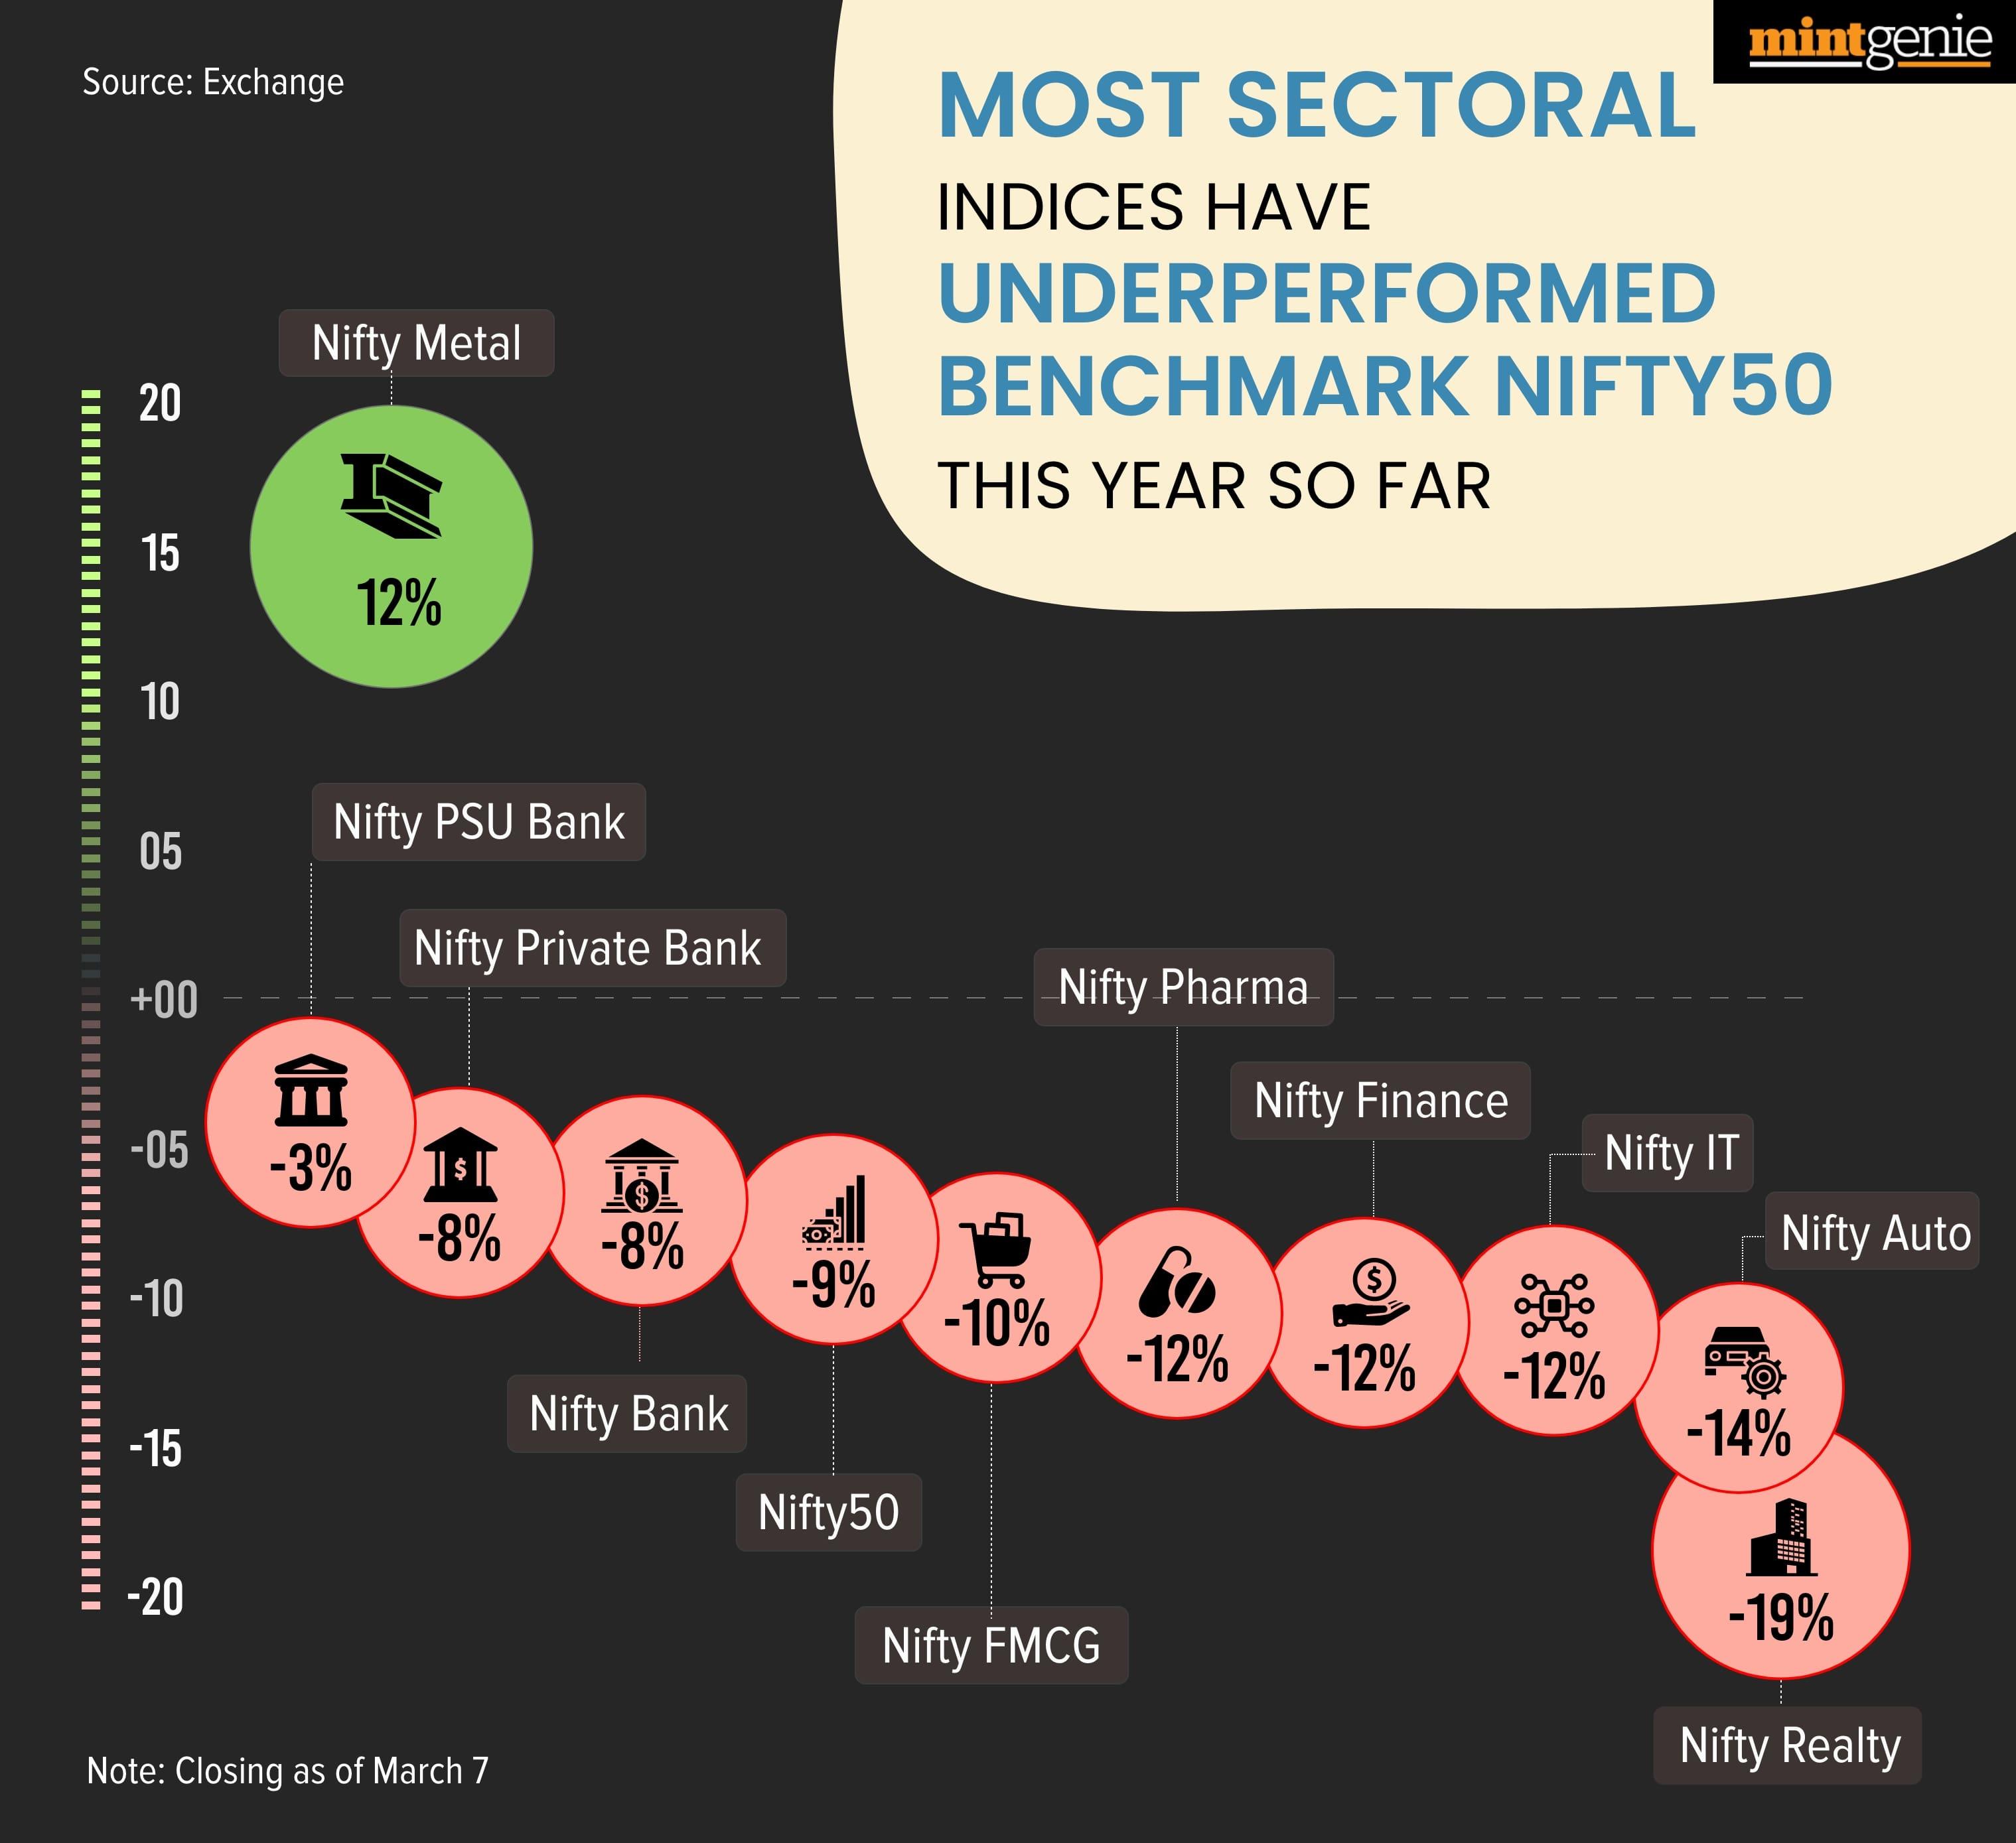 The recent selloff in the market has hit most sectoral indices, including the benchmark index. However, a majority of them have underperformed Nifty50 year-to-date (YTD). Nifty Metal index, however, have bucked the trend, rising 12 percent YTD.